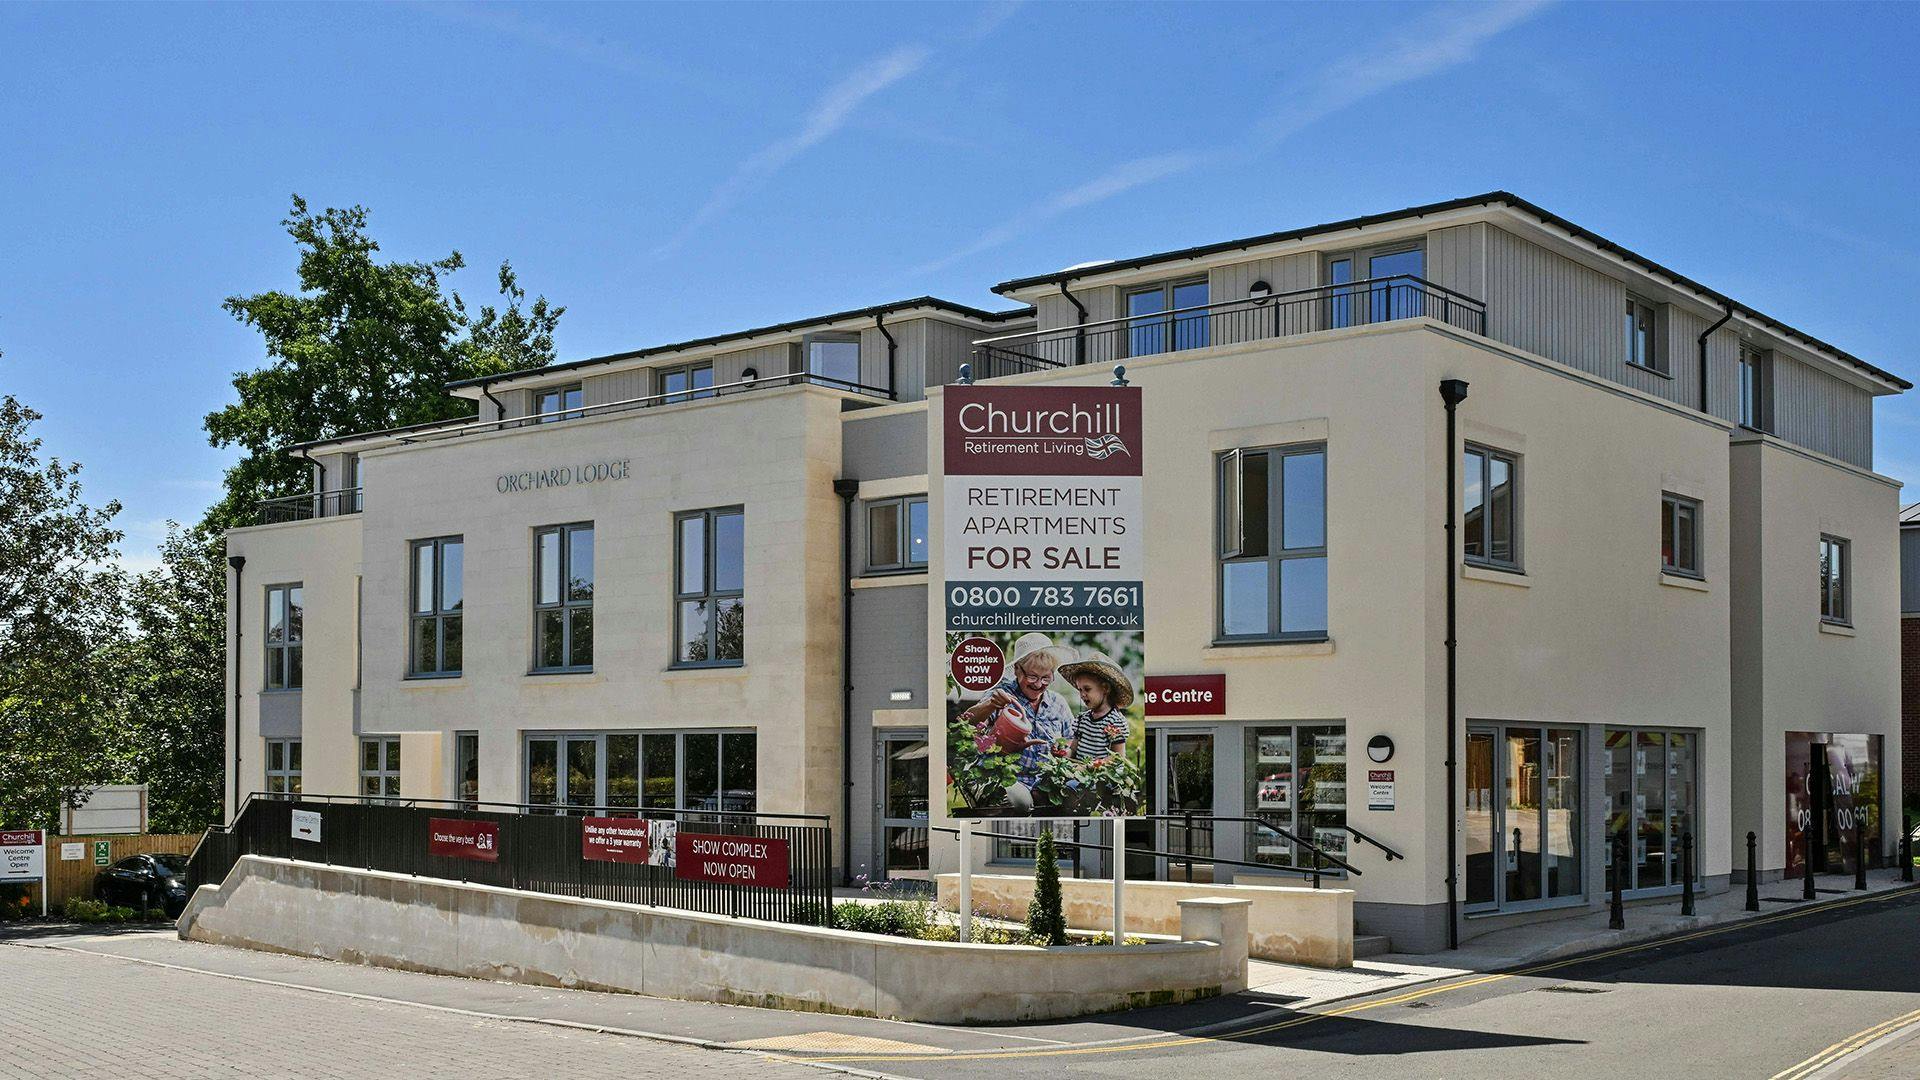 Exterior of Orchard Lodge retirement development in Calne, Wiltshire